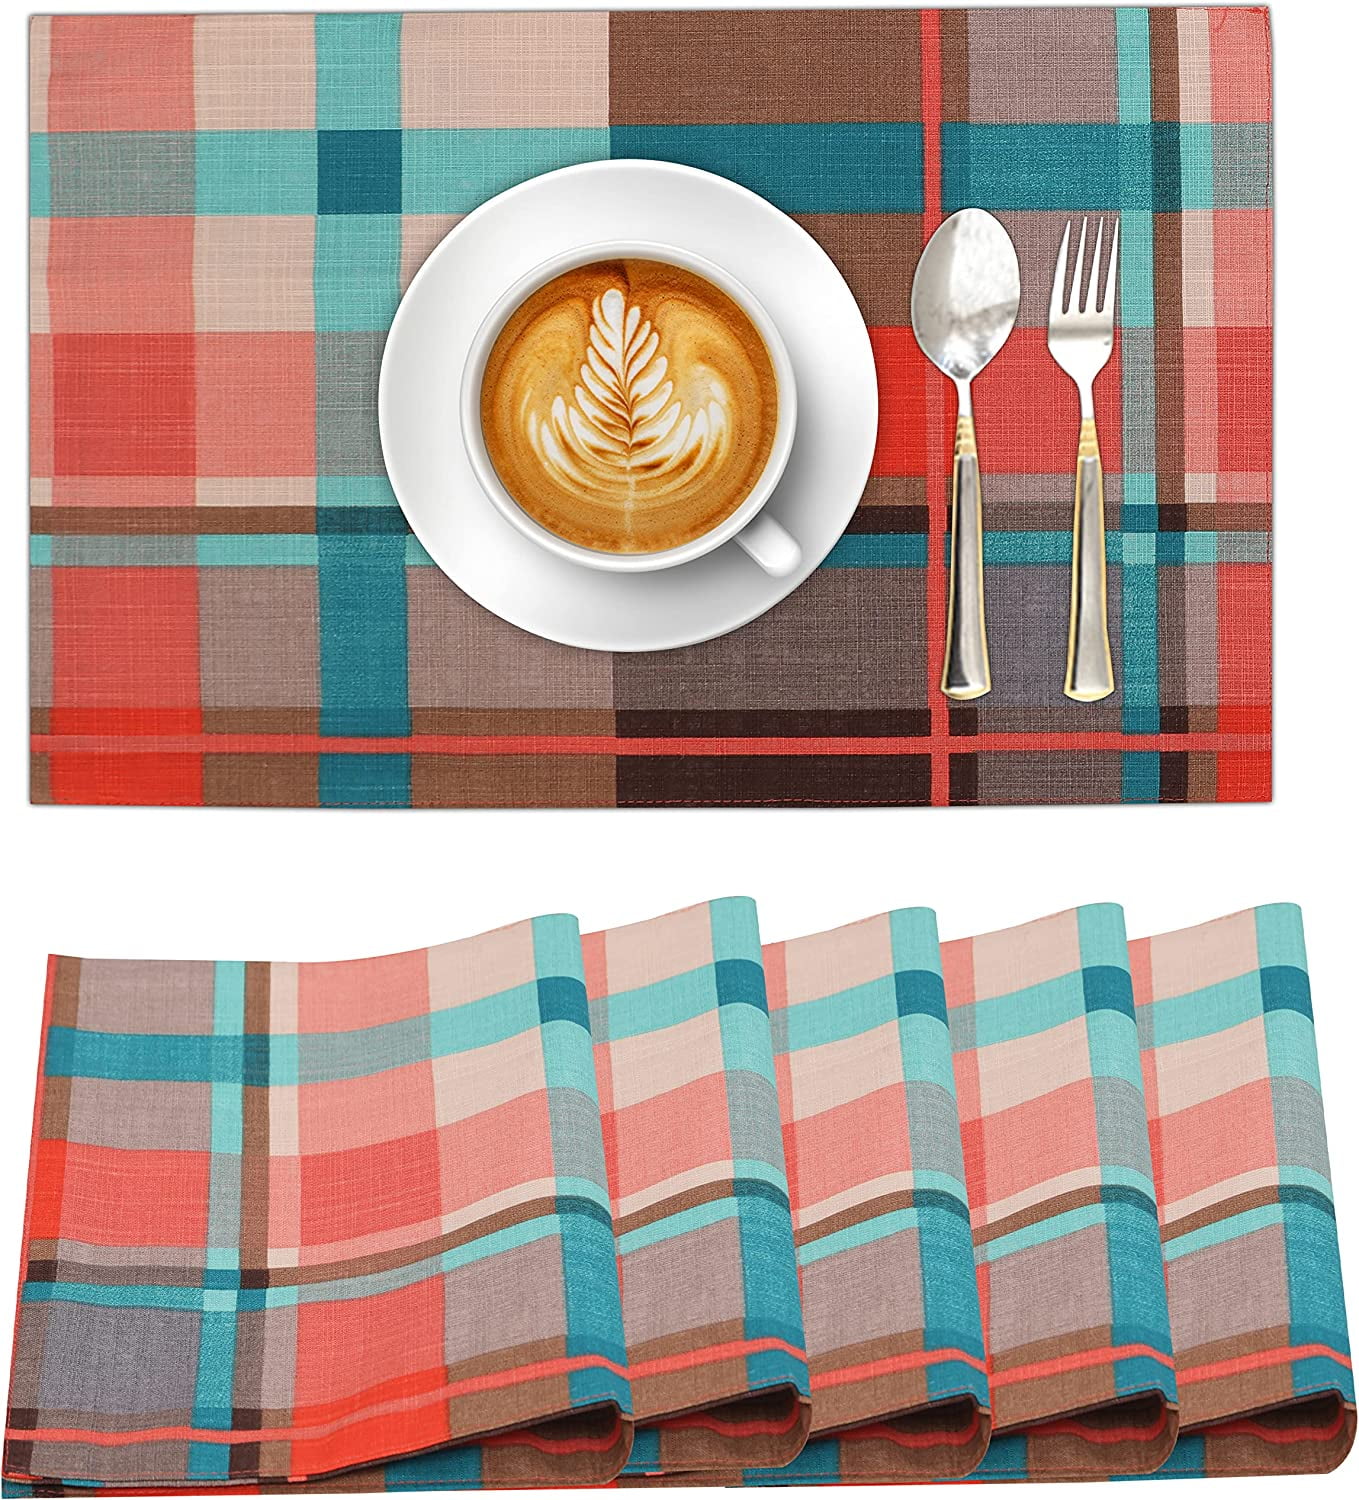 Ruvanti Placemats 100% Cotton 13x19 inch, Dining Table Placemats Set of 6, Modern Place Mats for Dining Table Décor, Kitchen & Table Linens, Coffee Mat for Christmas Dinners – Likely